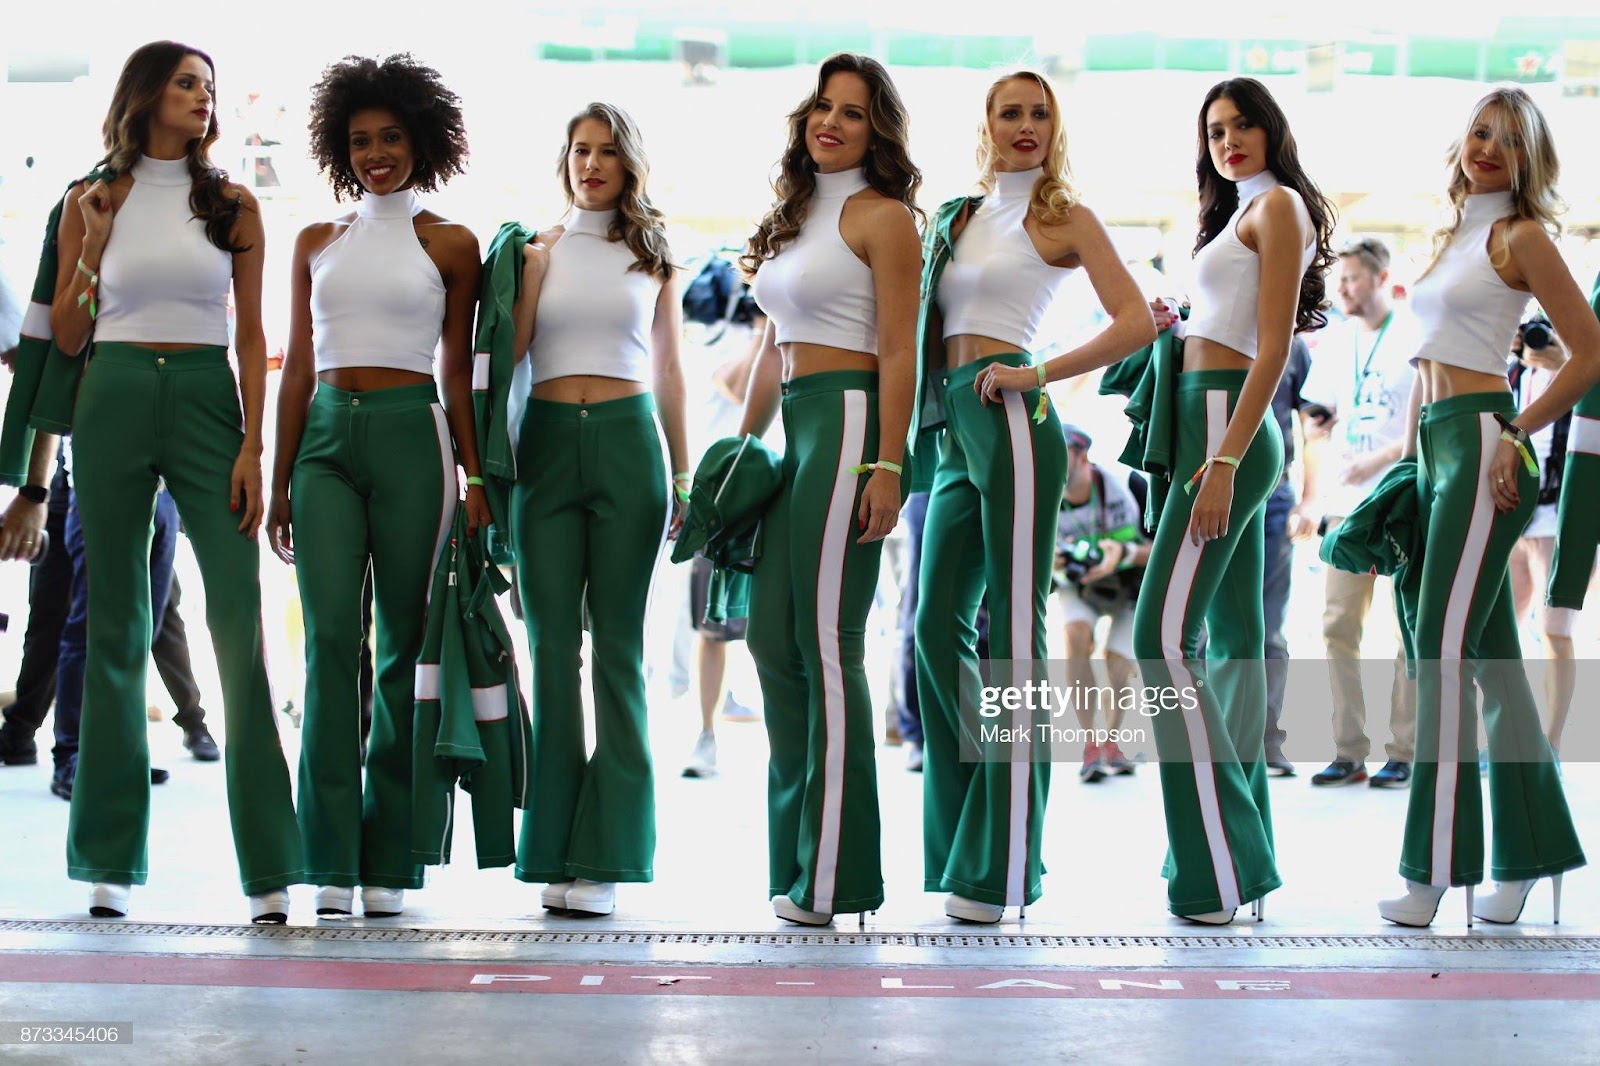 D:\Documenti\posts\posts\Women and motorsport\foto\Getty e altre\grid-girls-pose-for-a-photo-before-the-formula-one-grand-prix-of-at-picture-id873345406.jpg